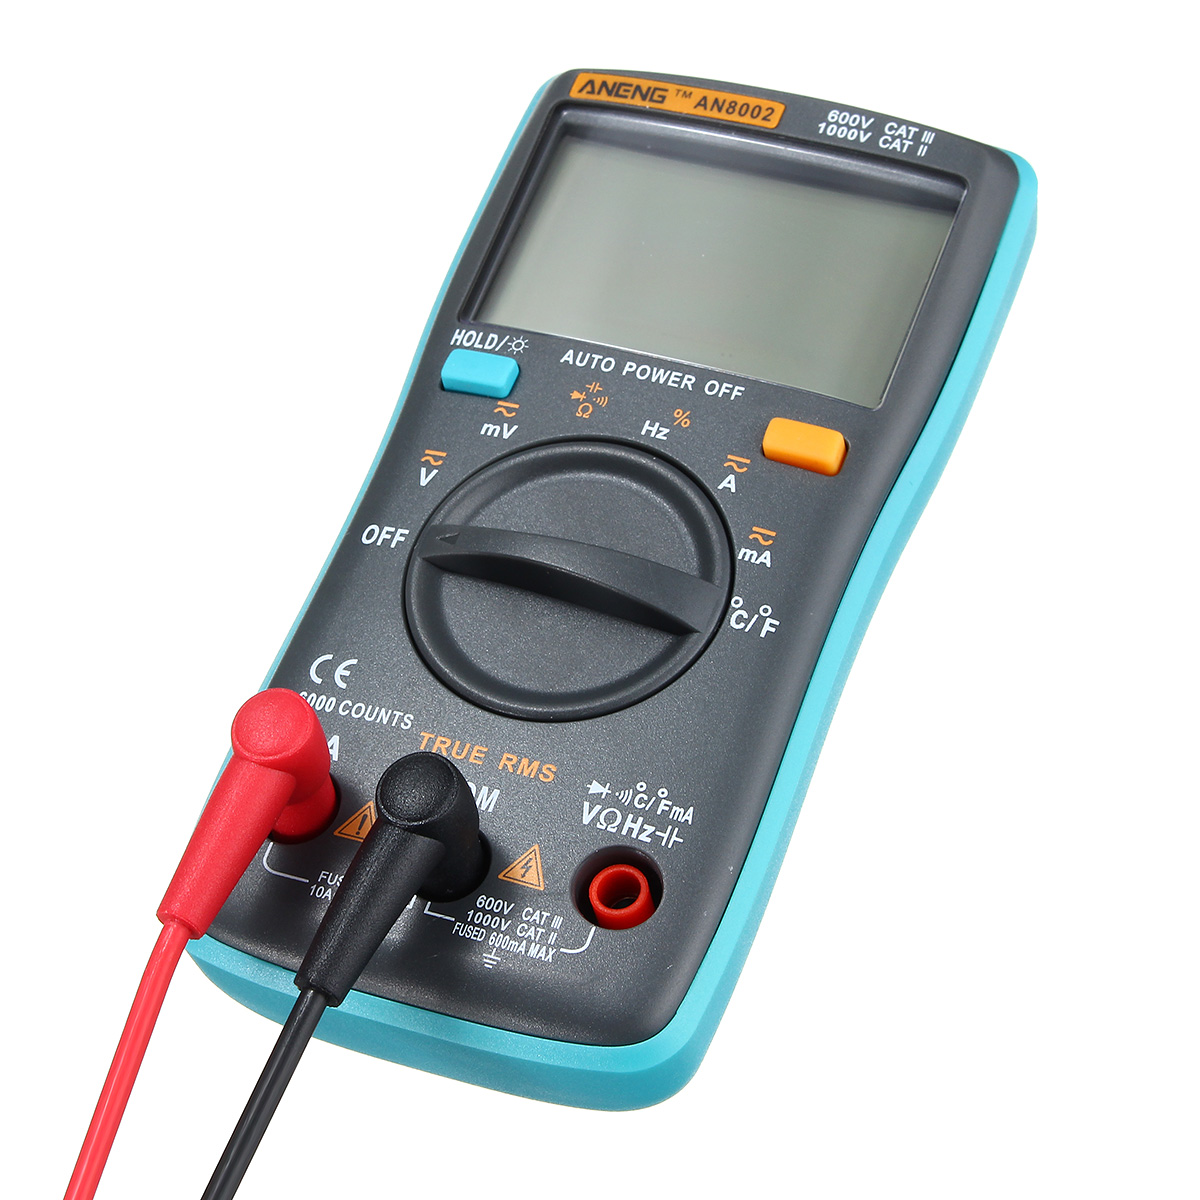 ANENG AN8002 Digital True RMS 6000 Counts Multimeter AC/DC Current Voltage Frequency Resistance Temperature Tester ℃/℉ 149